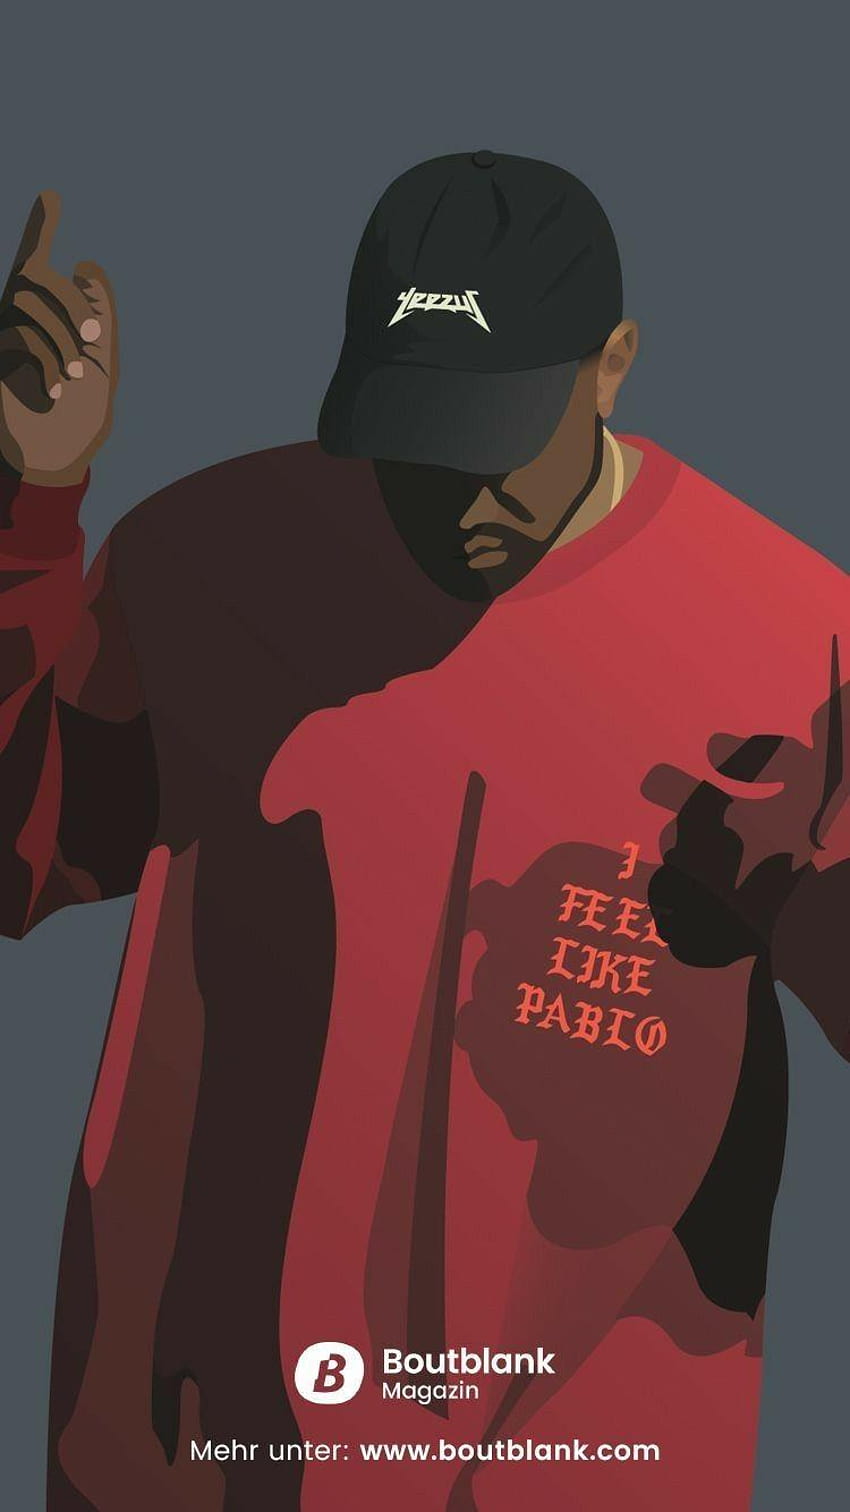 This Kanye Music Video Is Actually Based On Anime